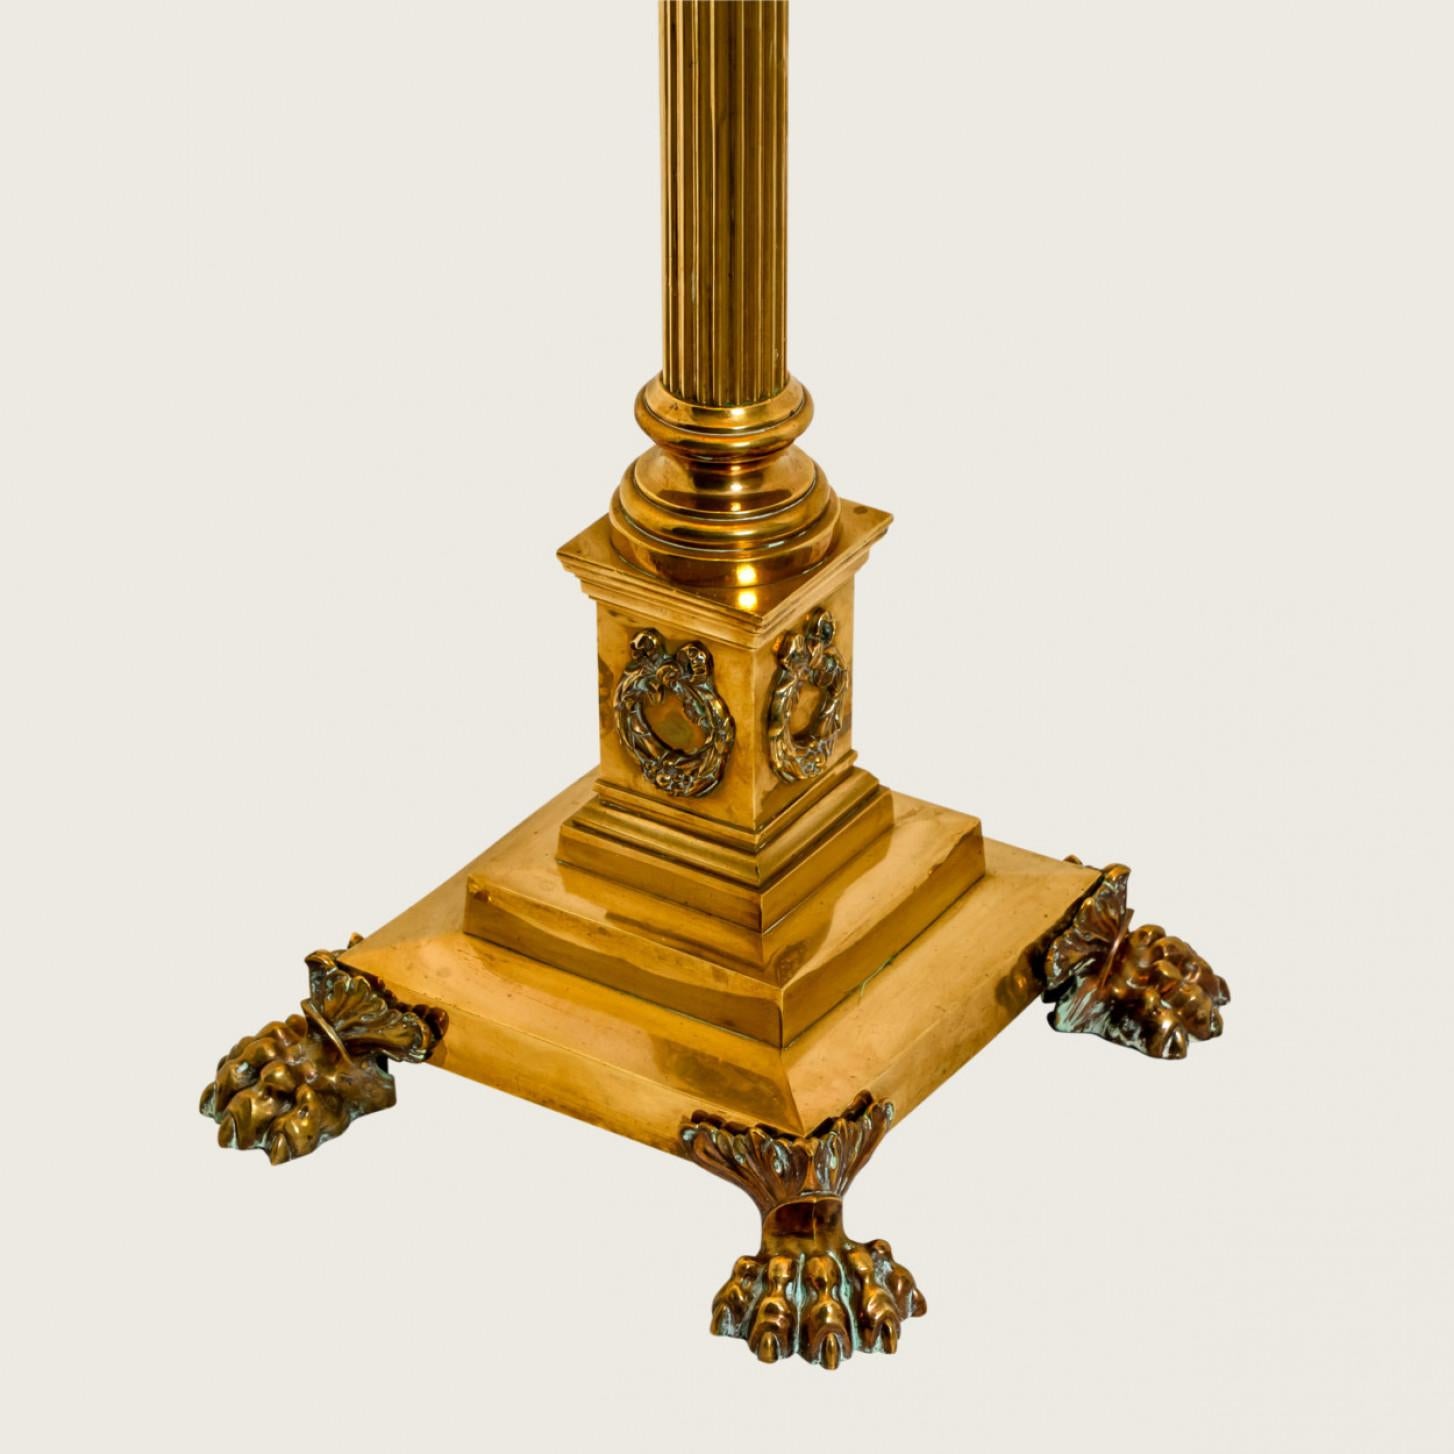 Antique Corinthian Column Brass Floor Lamp with Fringed Lampshade, England, 1890 For Sale 1